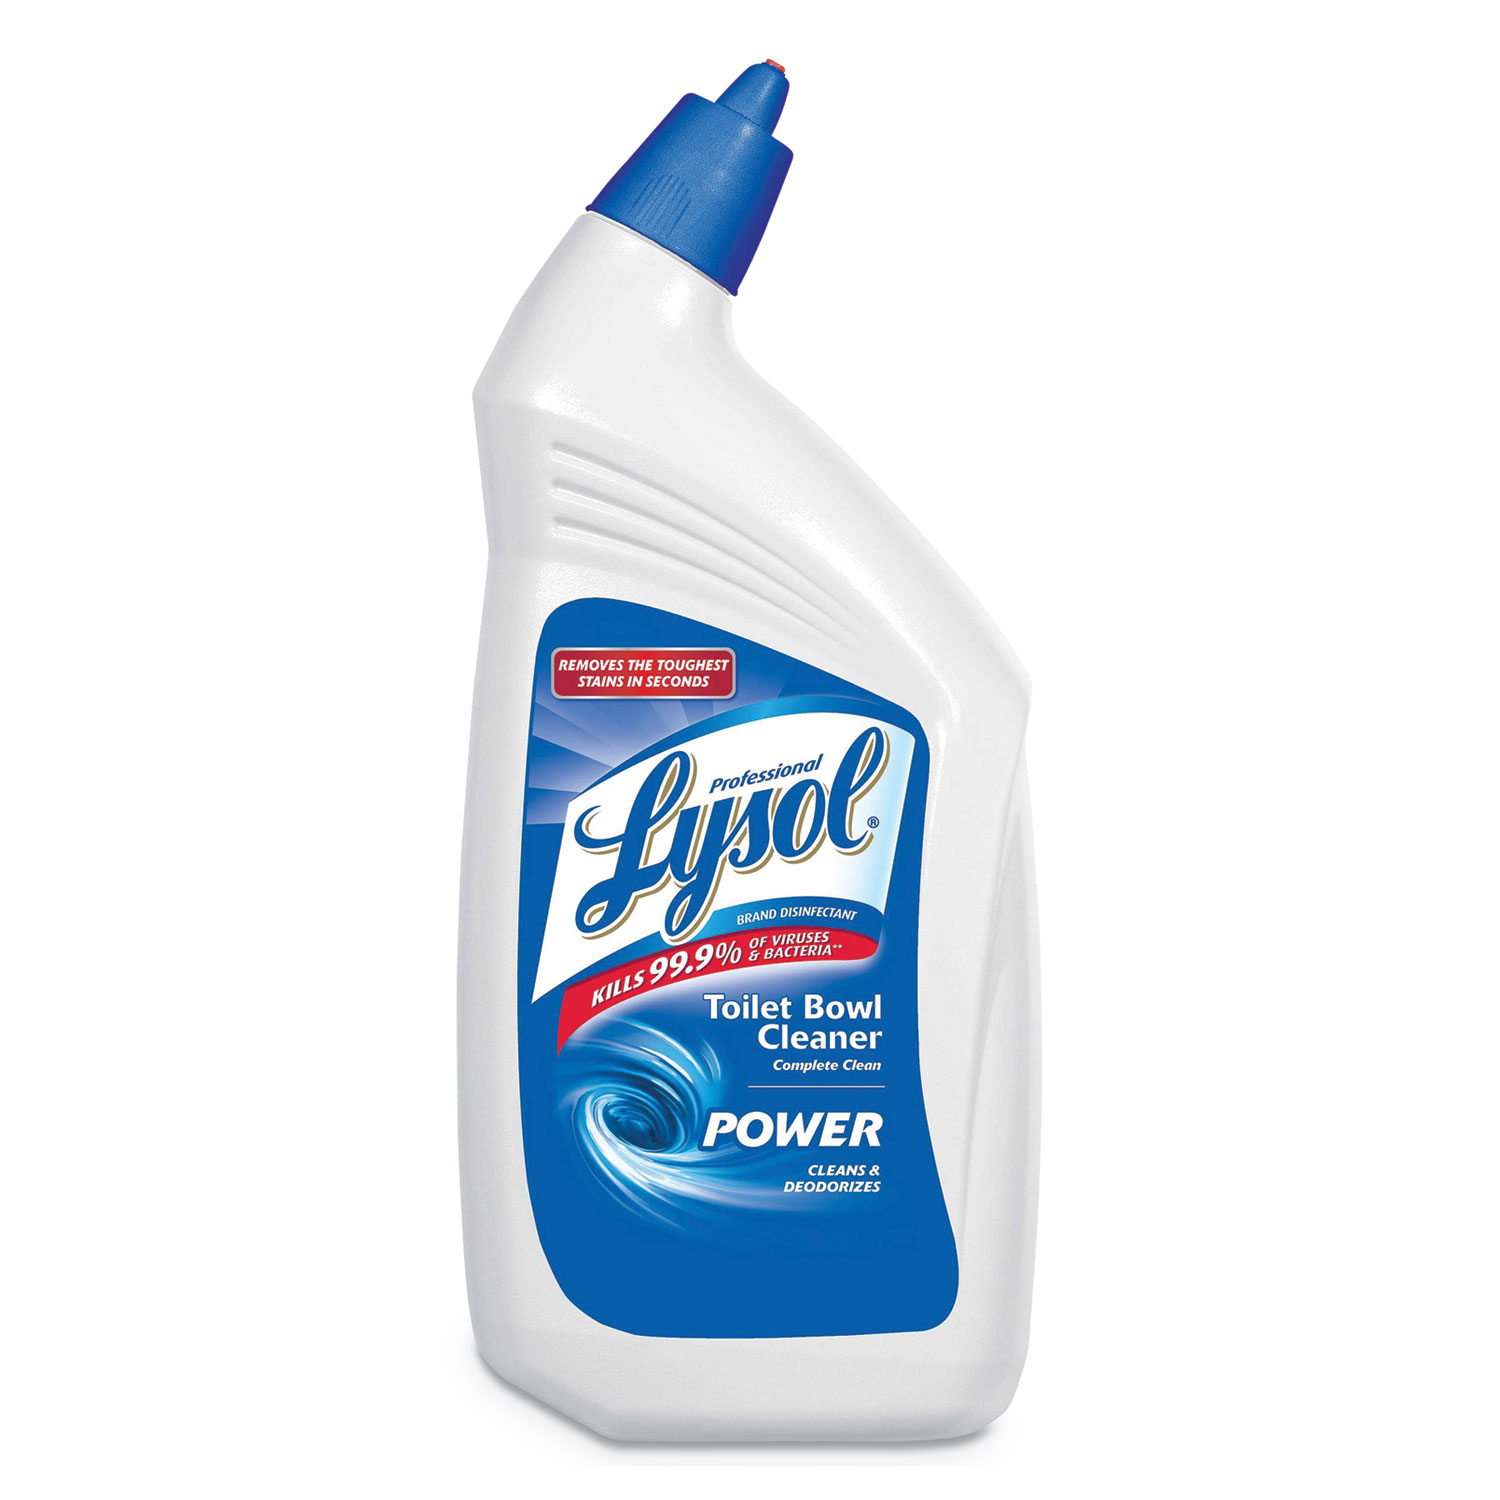 Disinfectant Toilet Bowl Cleaner by Professional LYSOL